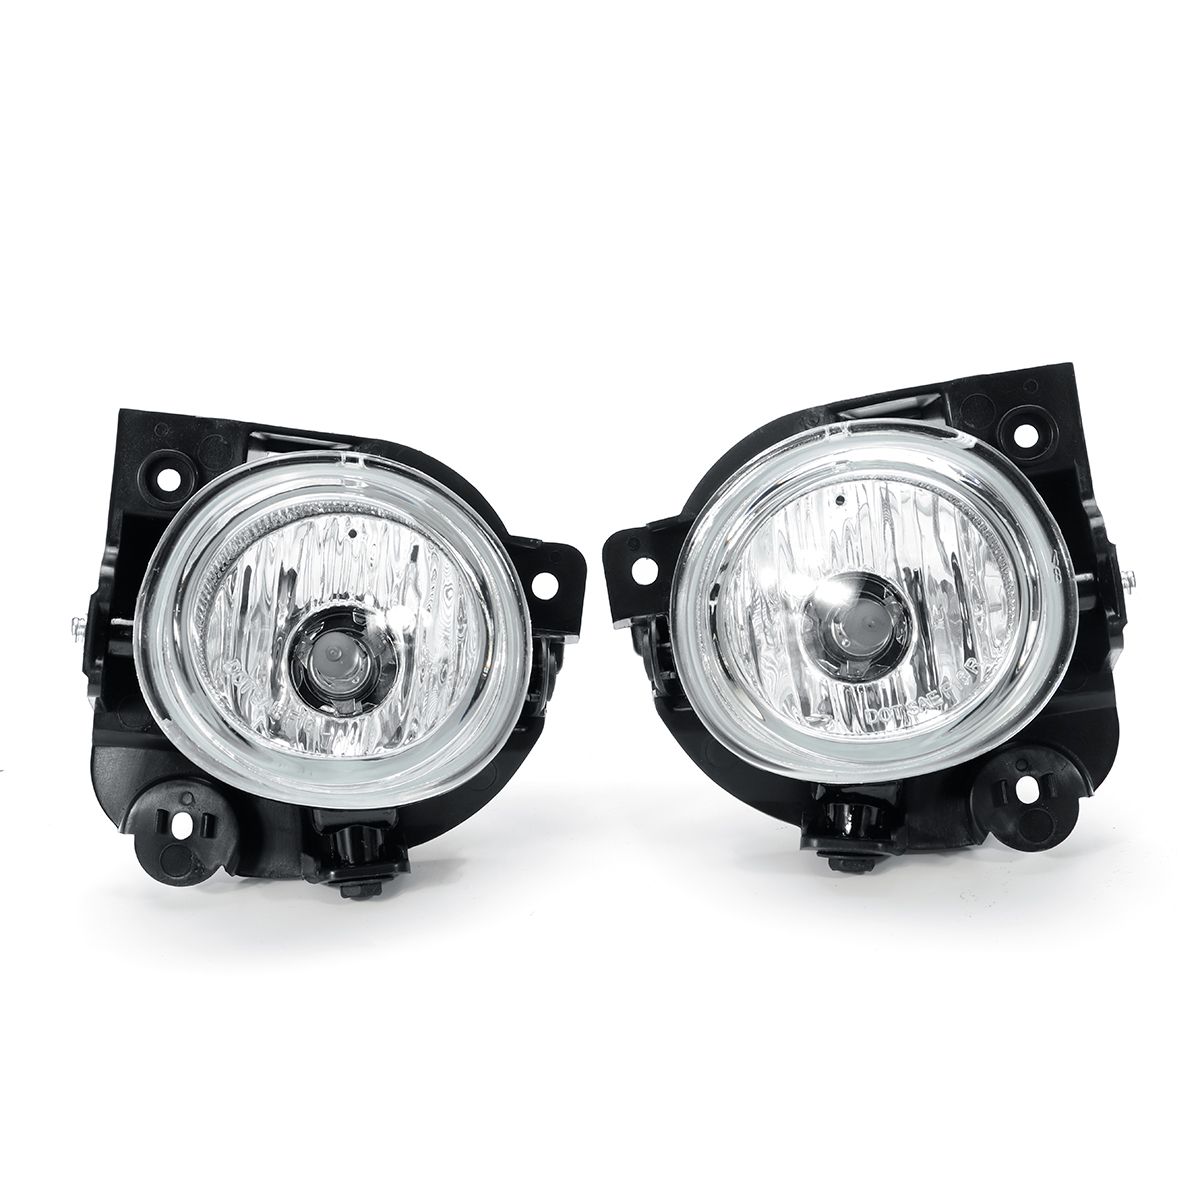 2Pcs-Car-Front-Bumper-Fog-Lights-Auto-Lamps--H11-Bulb-With-Covers-Wiring-Harness-Kit-For-Mazda-BT-50-1674207